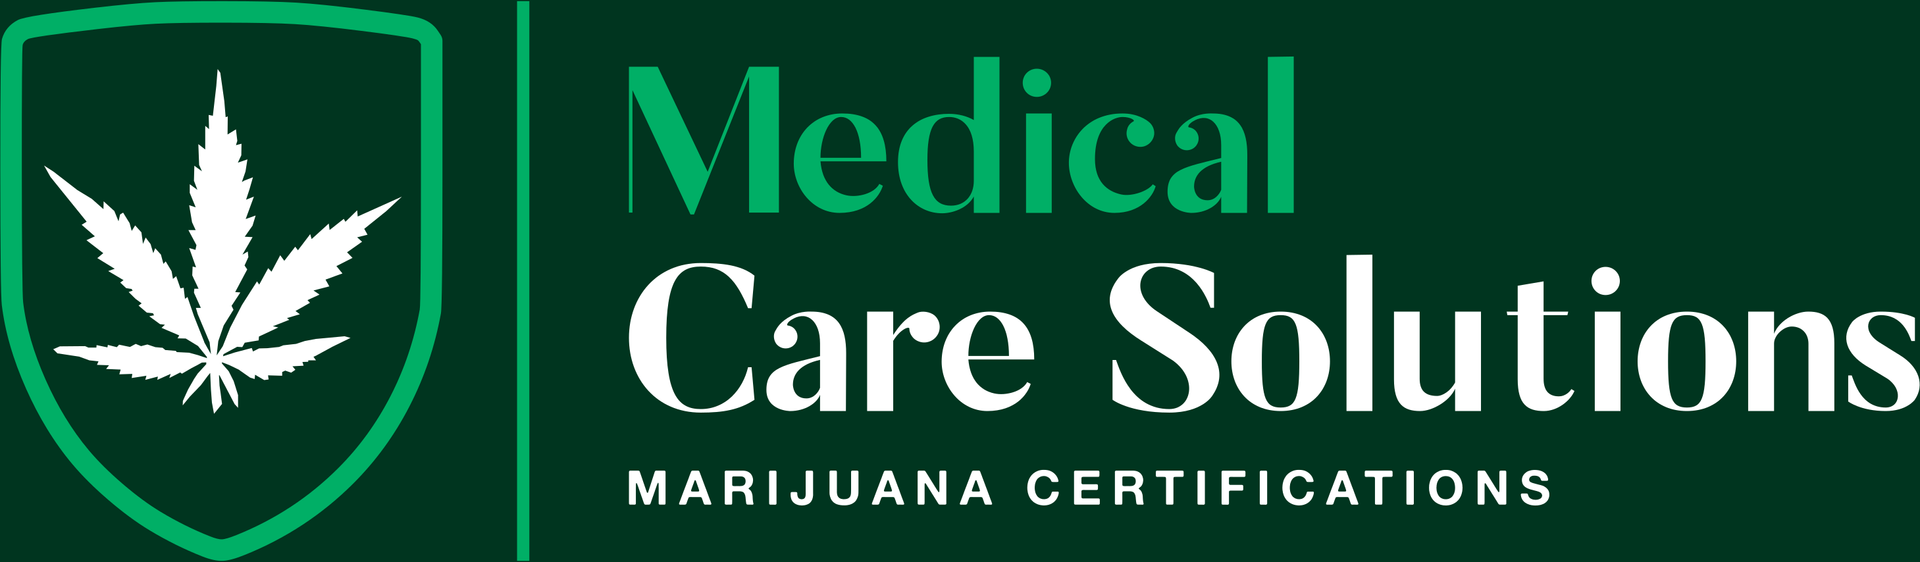 Medical Care Solutions Business Logo 